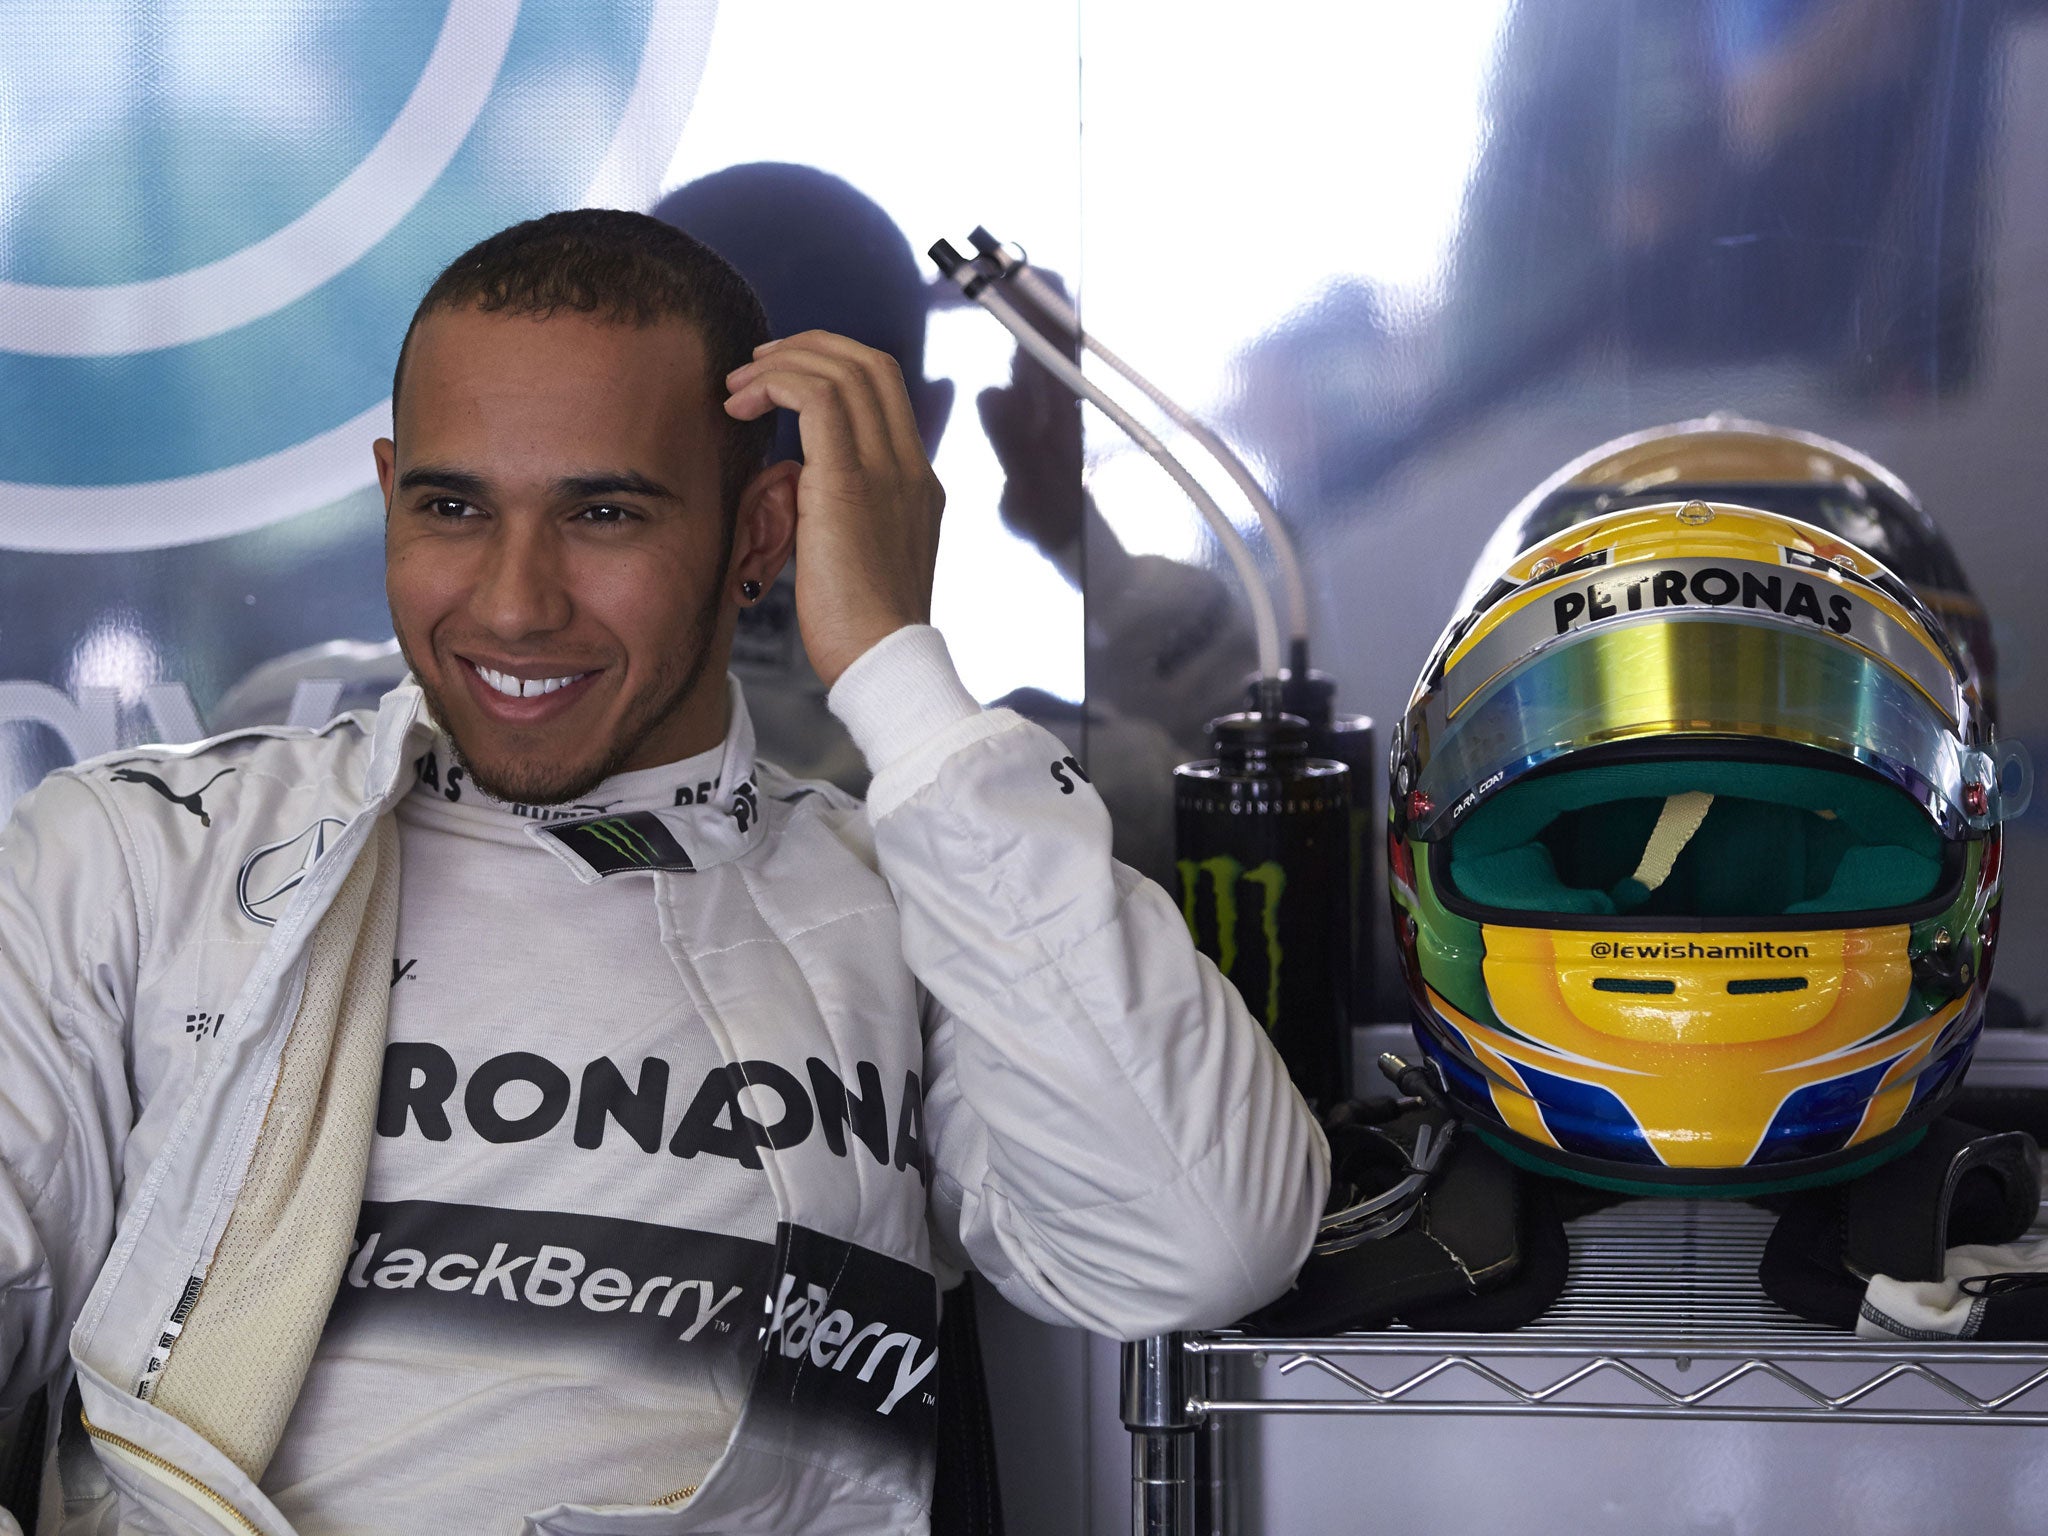 Smiles ahead: Lewis Hamilton is delighted after taking pole for Mercedes